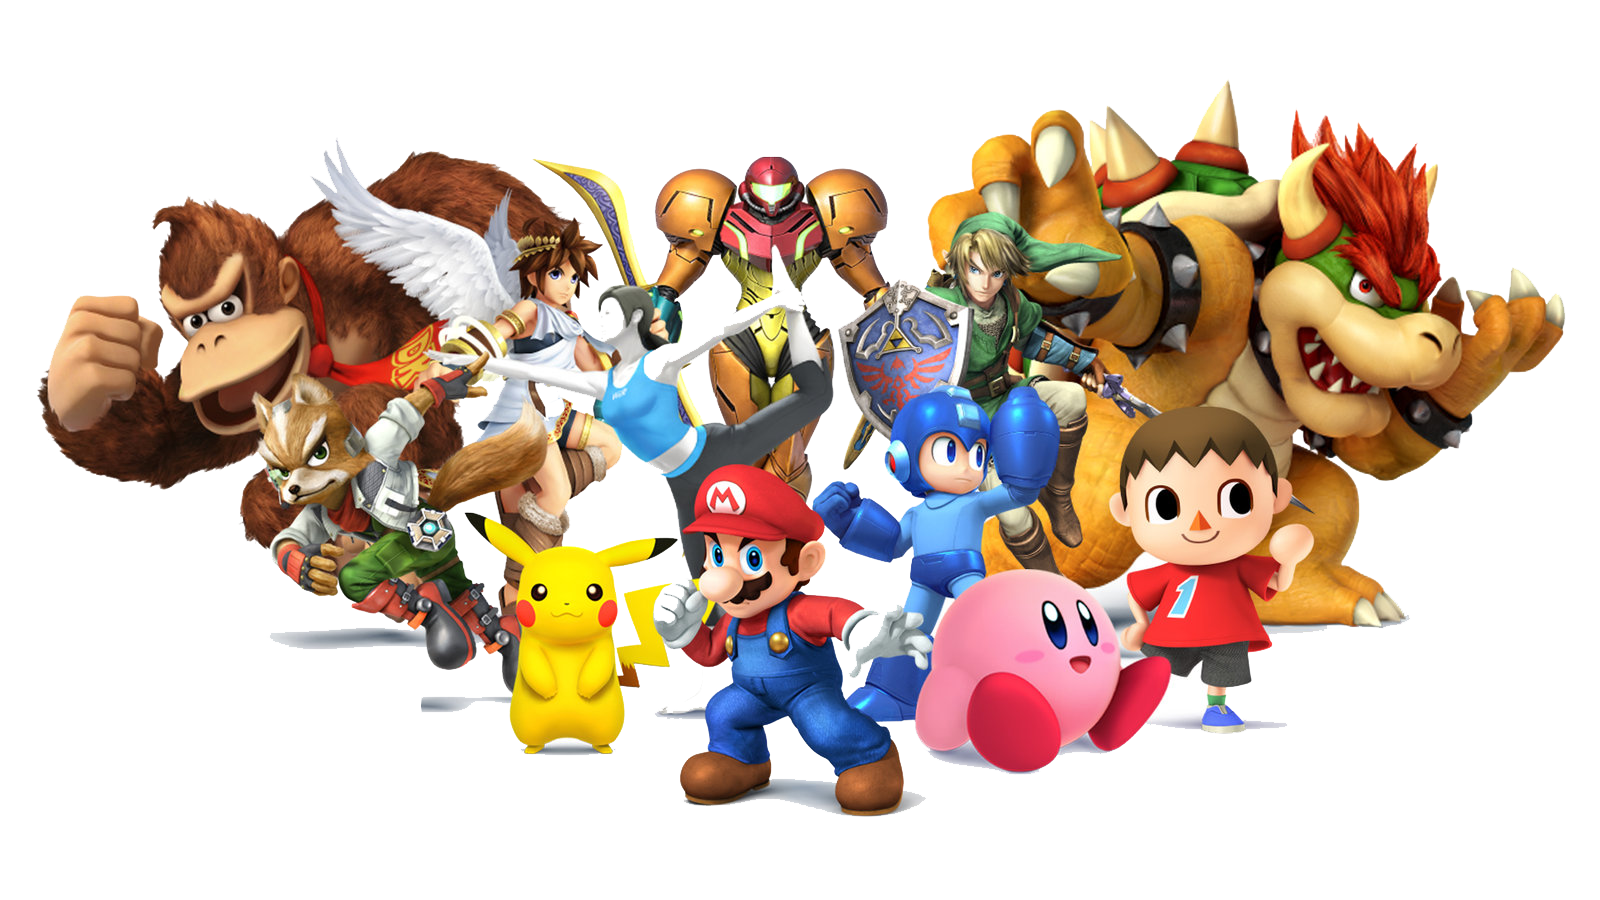 Smash Toy For 3Ds Brawl Wallpaper PNG Image